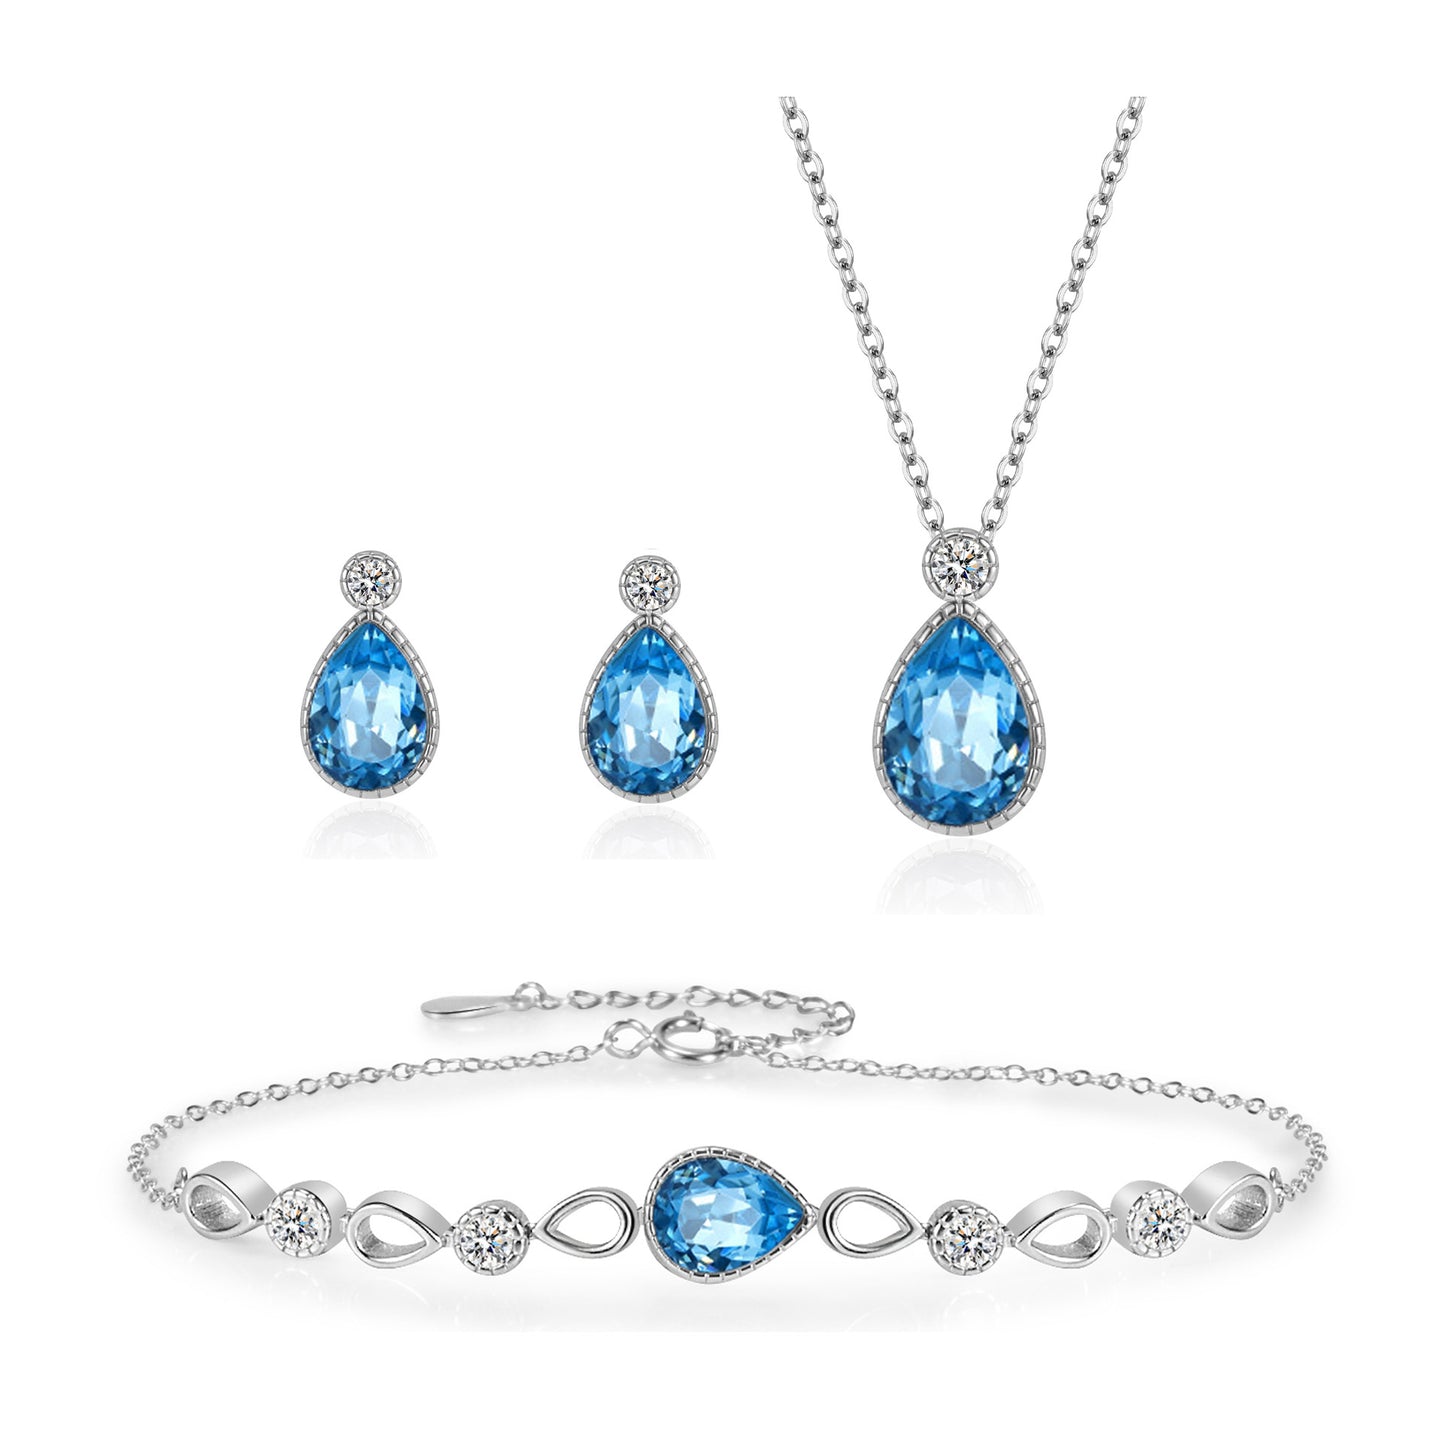 Sterling Silver Tears of the Mermaid Jewelry Set: Exquisite Crystal Adornments for Women